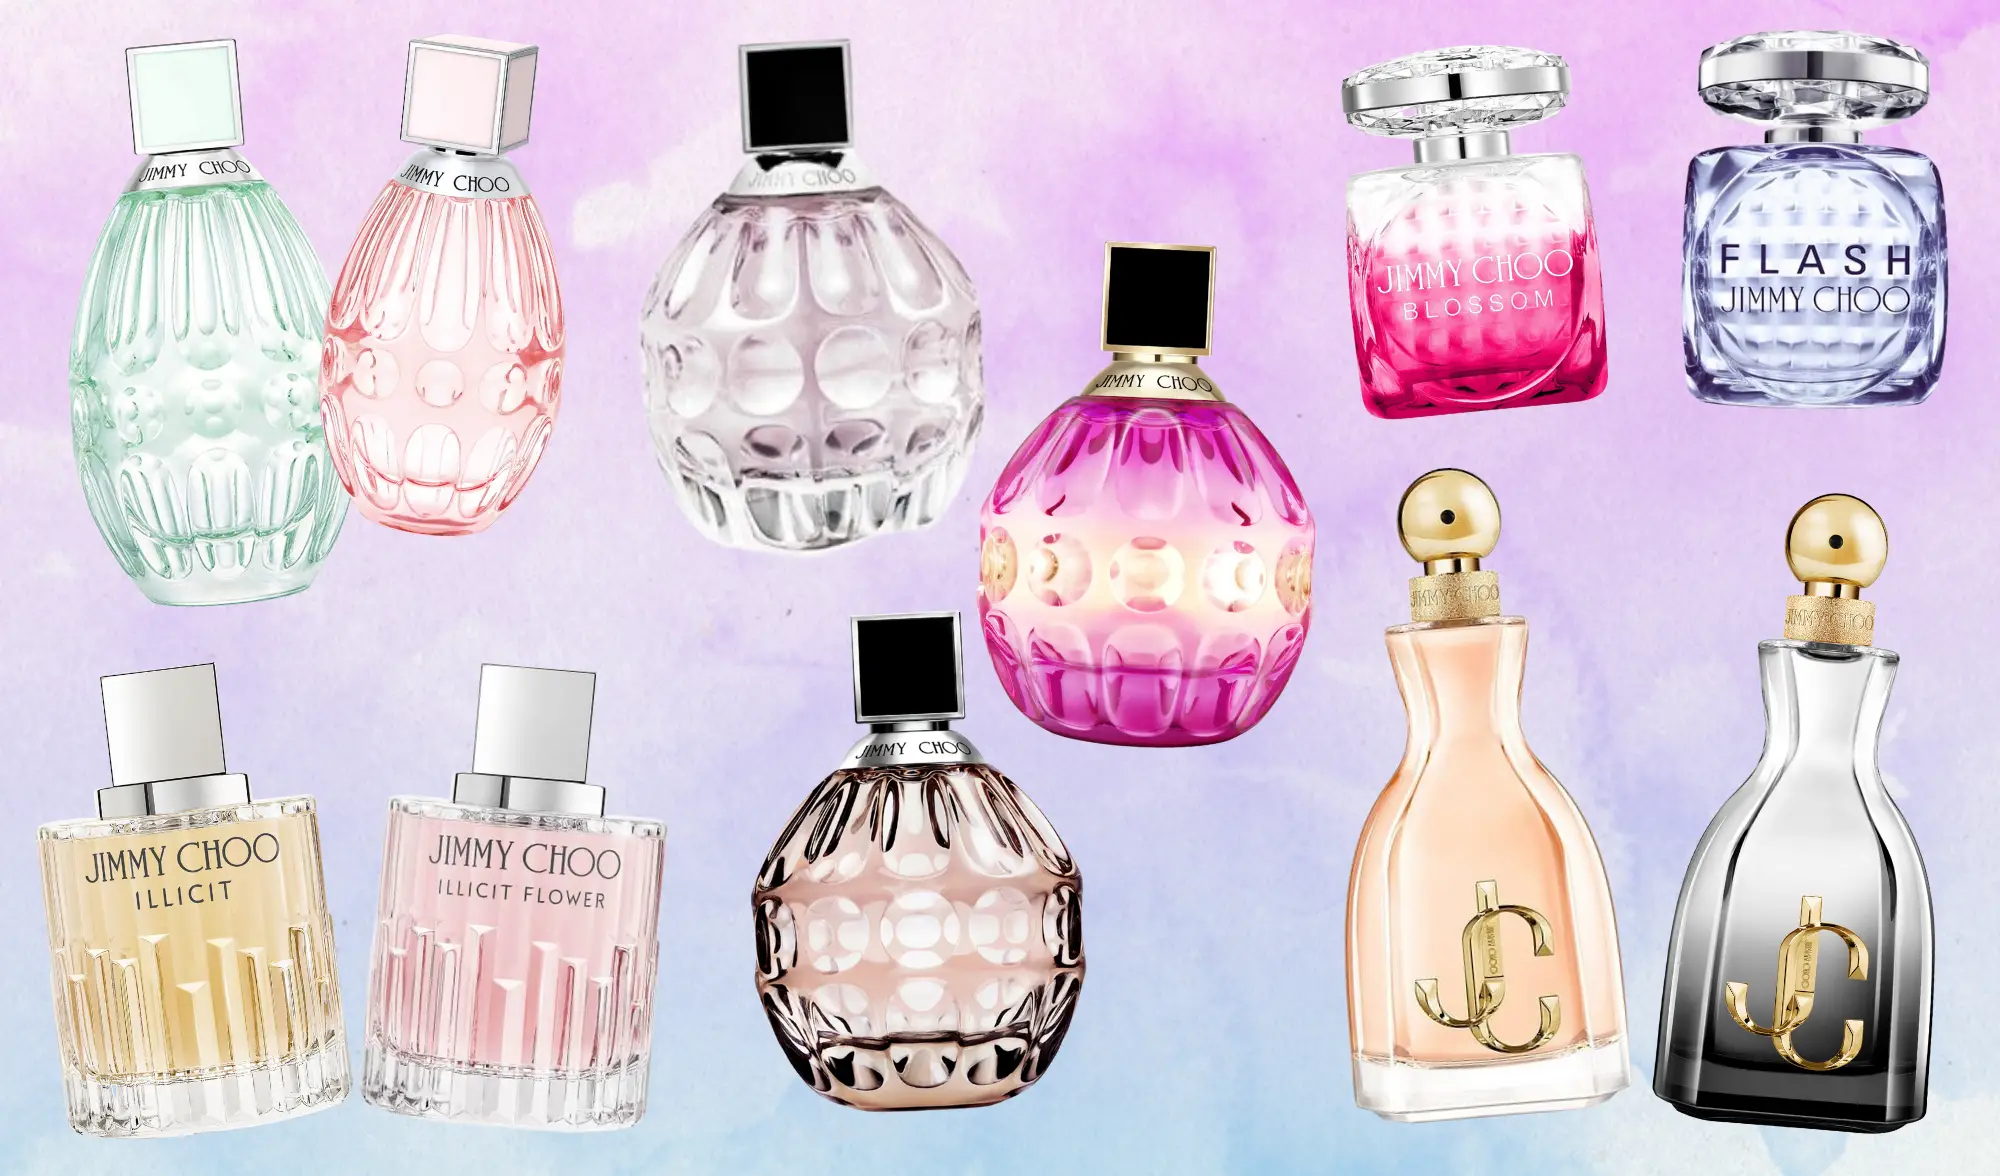 The Ultimate Guide To The Jimmy Choo Perfume Range